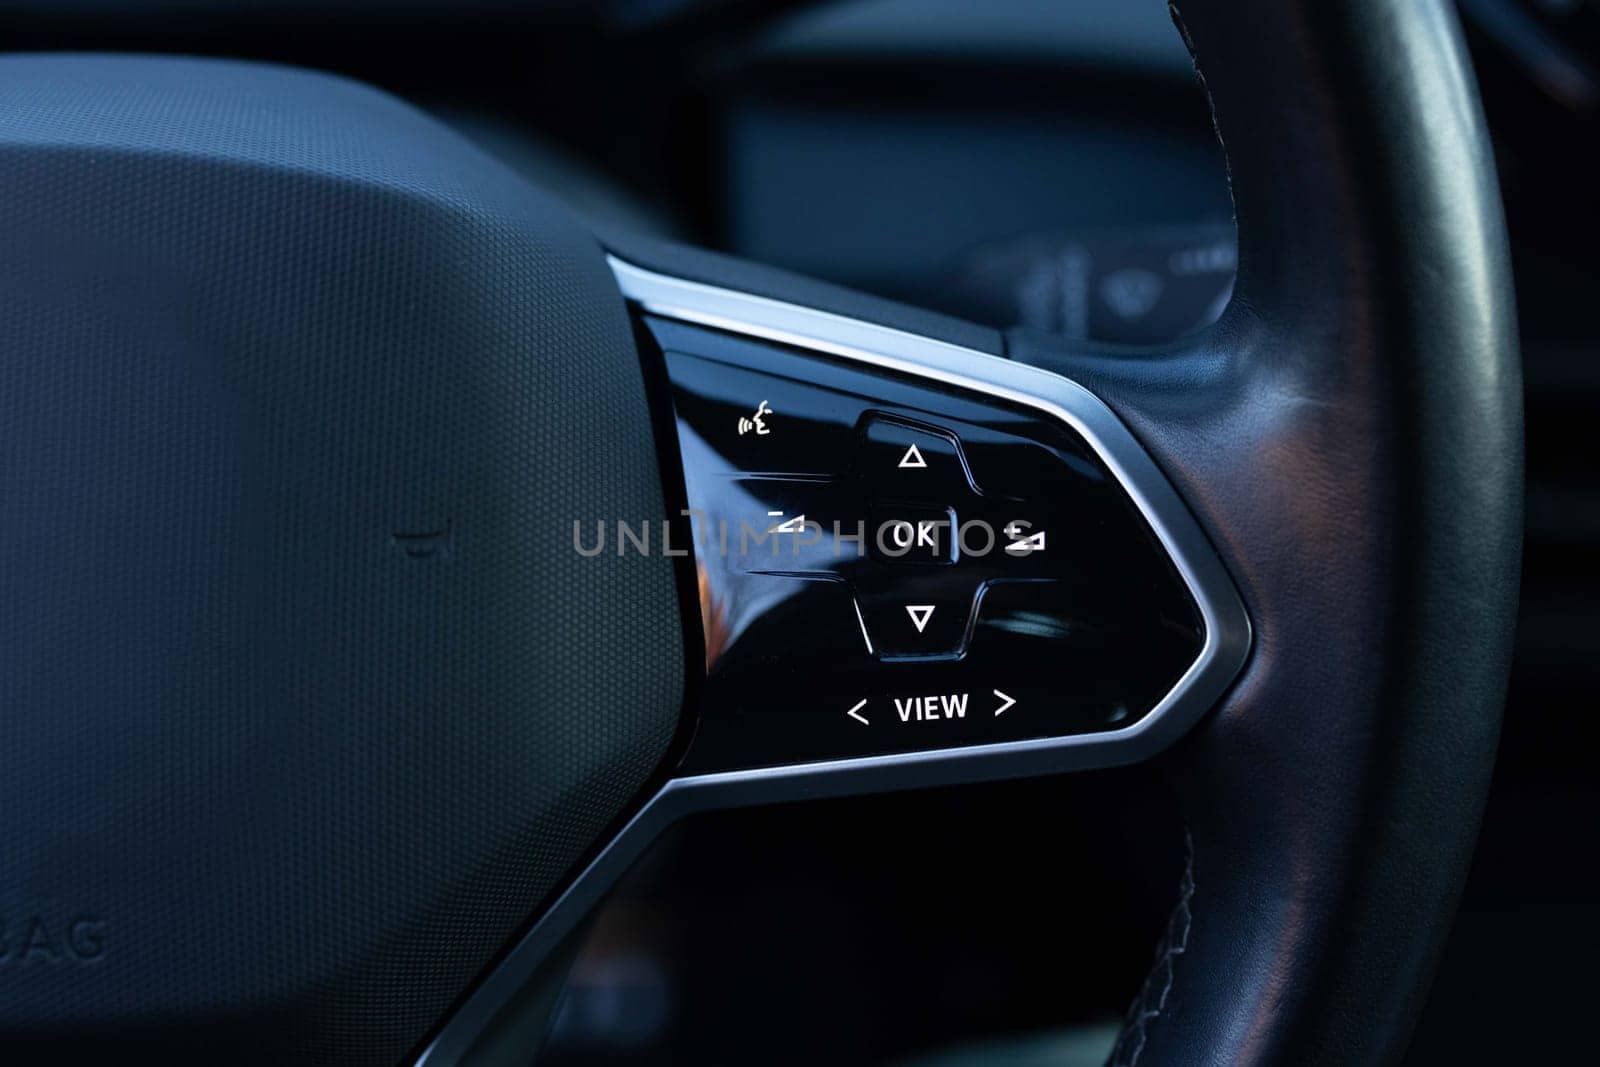 Close-up view of car interior. View of steering wheel of car control music. Volume button of car radio on steering wheel. Turns up the volume of the music in the car